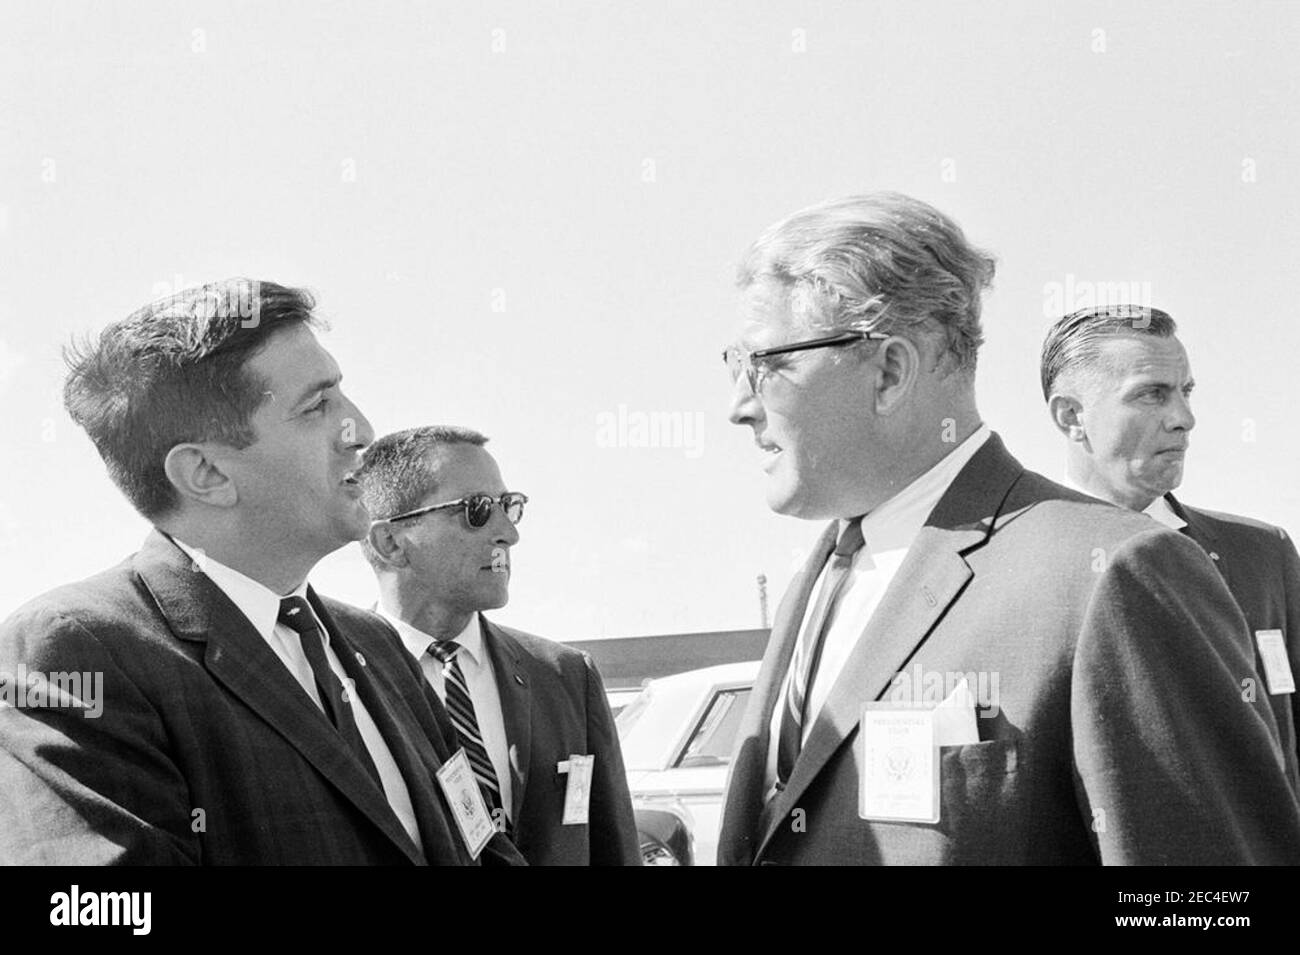 Inspection tour of NASA installations: Cape Canaveral Florida, 2:31PM. Director of the George C. Marshall Space Flight Center (MSFC), Dr. Wernher von Braun (right), speaks with an unidentified man during President John F. Kennedyu0027s visit to Cape Canaveral Air Force Station, Cape Canaveral, Florida; White House Secret Service agent, Roy Kellerman, stands in back at right. President Kennedy visited Cape Canaveral as part of a two-day inspection tour of National Aeronautics and Space Administration (NASA) field installations. Stock Photo